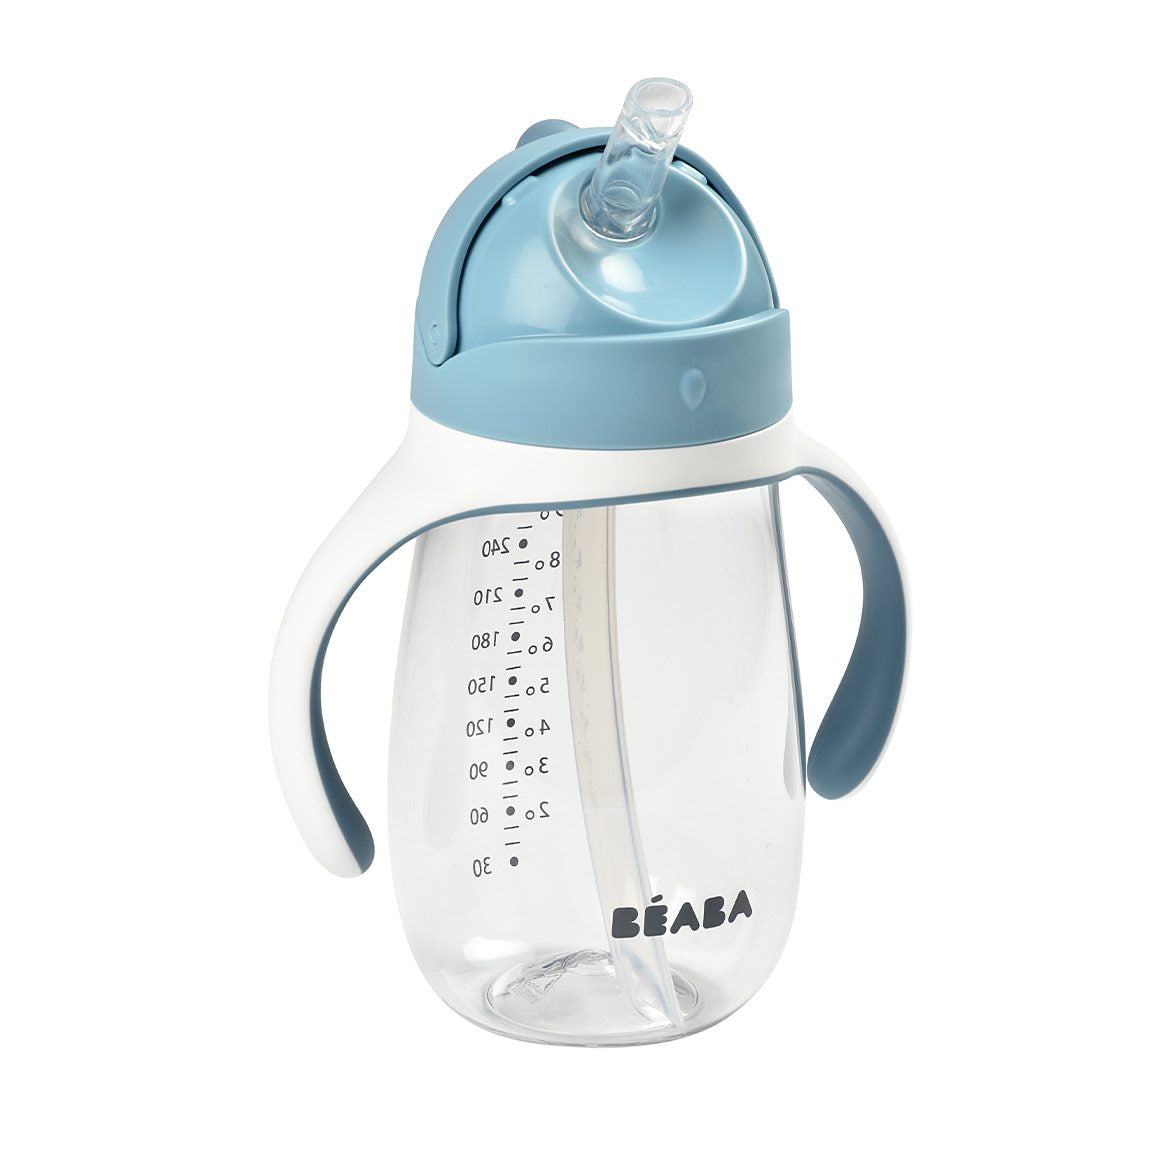 Beaba Sippy Cup - Windy Blue